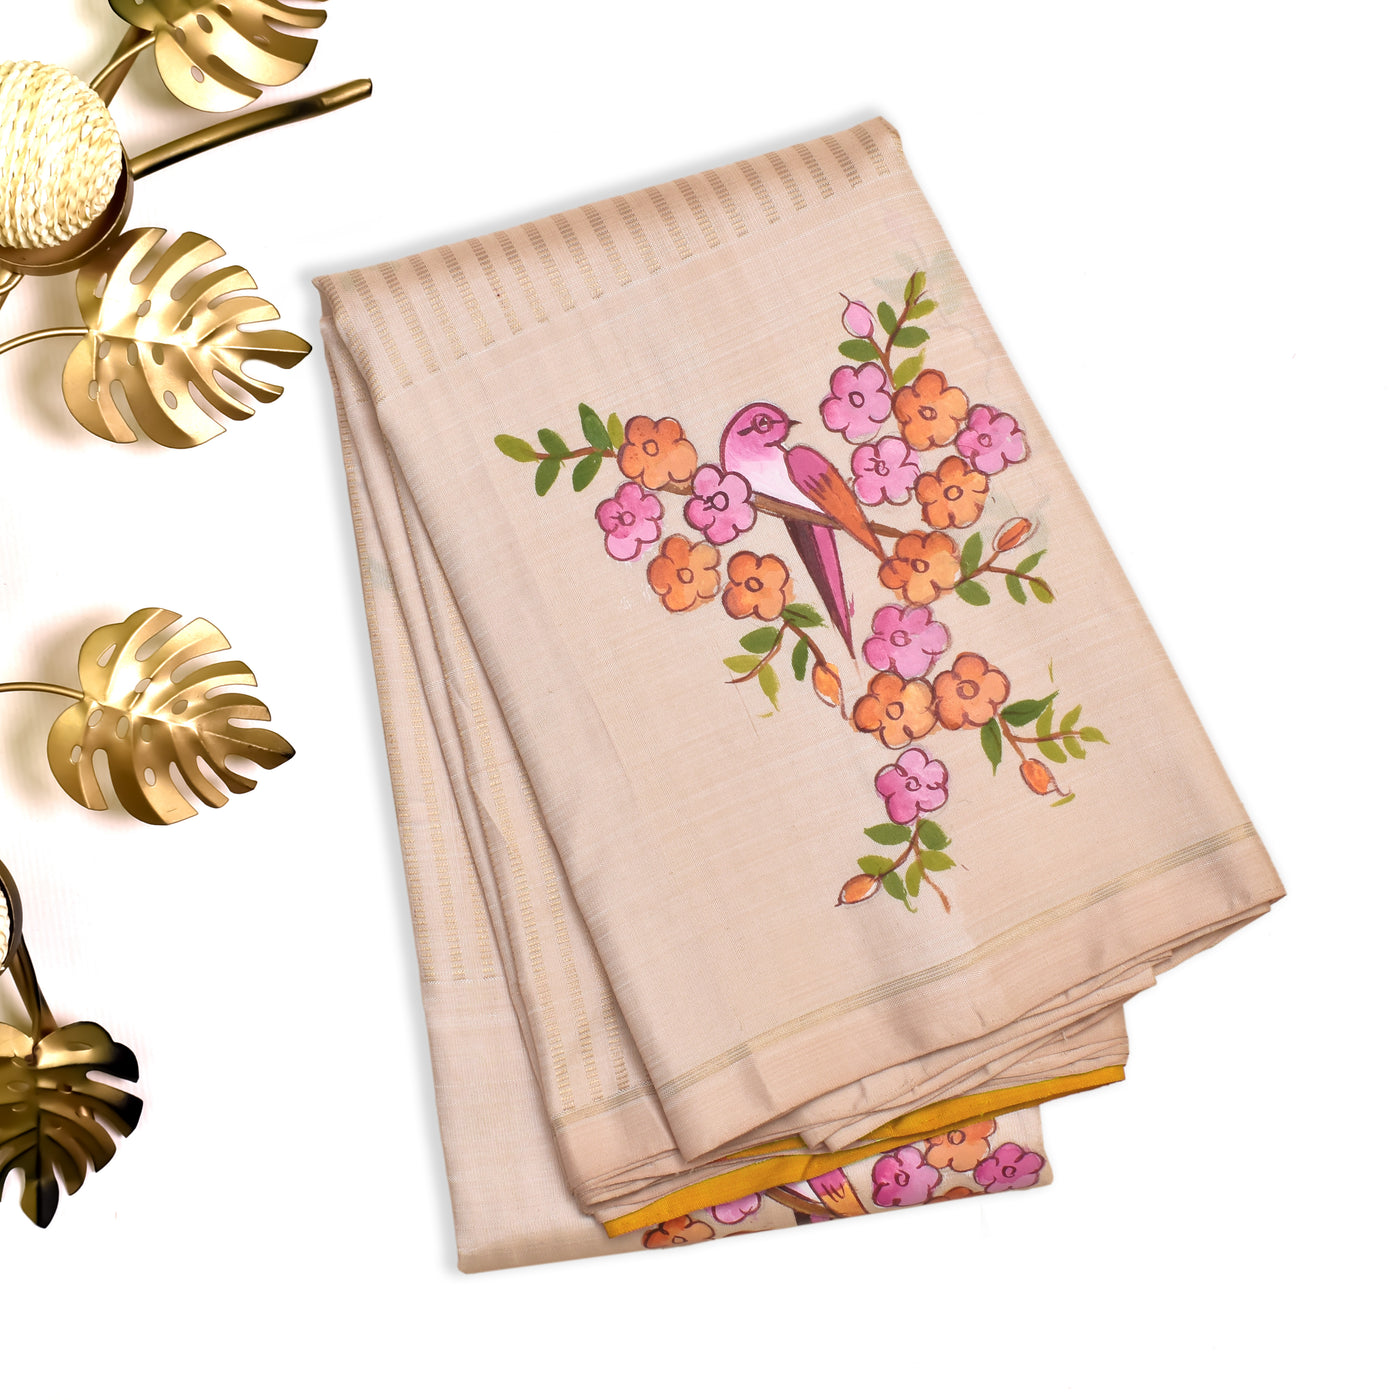 Off White Hand Painted Kanchi Silk Saree with Birds Floral Design